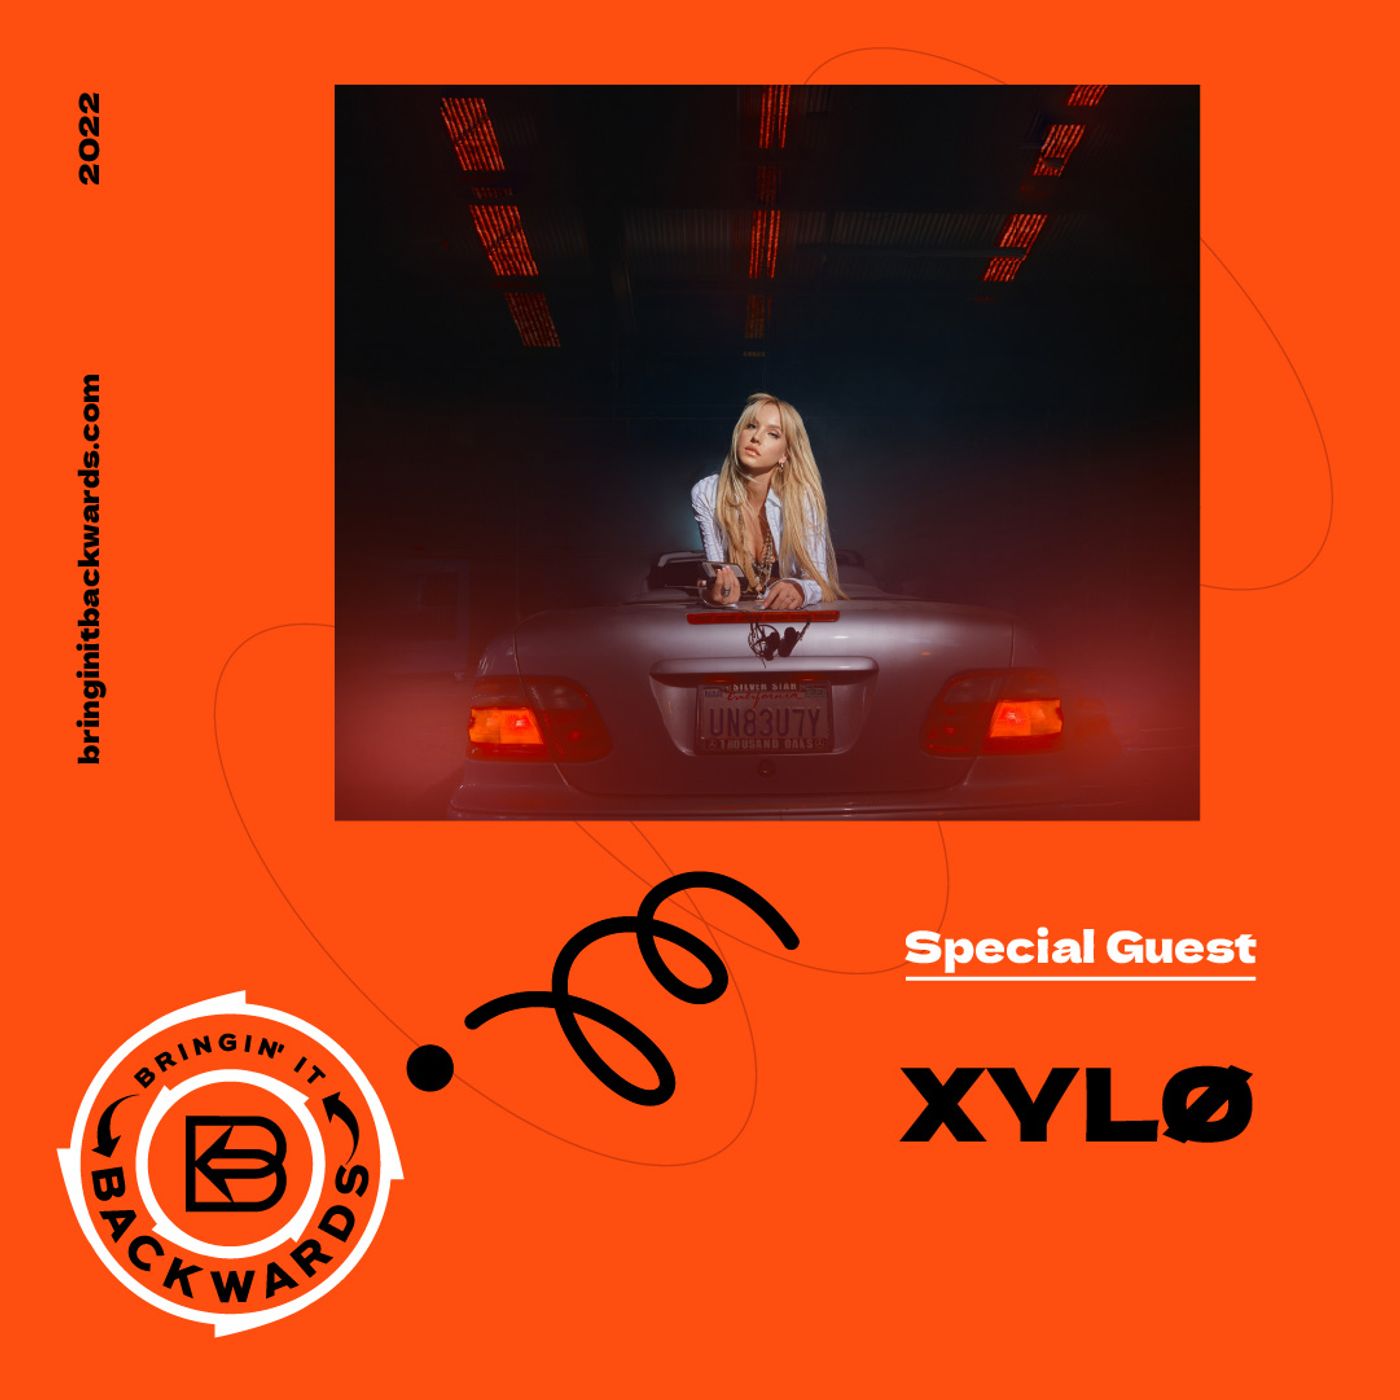 Interview with XYLØ Image